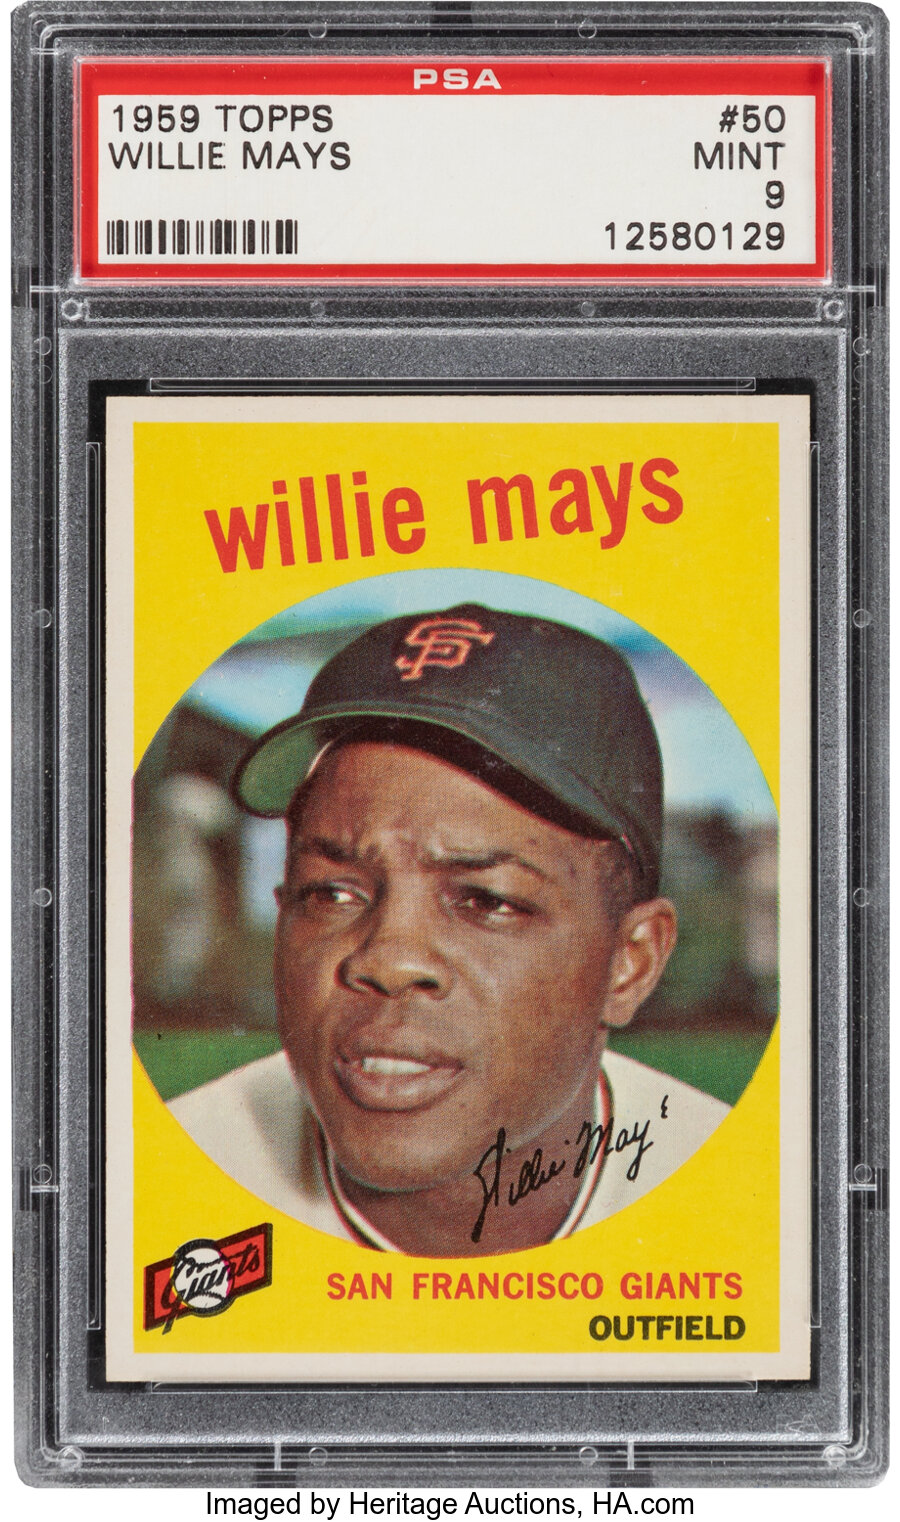 1959 Topps Willie Mays #50 PSA Mint 9 - Four Higher